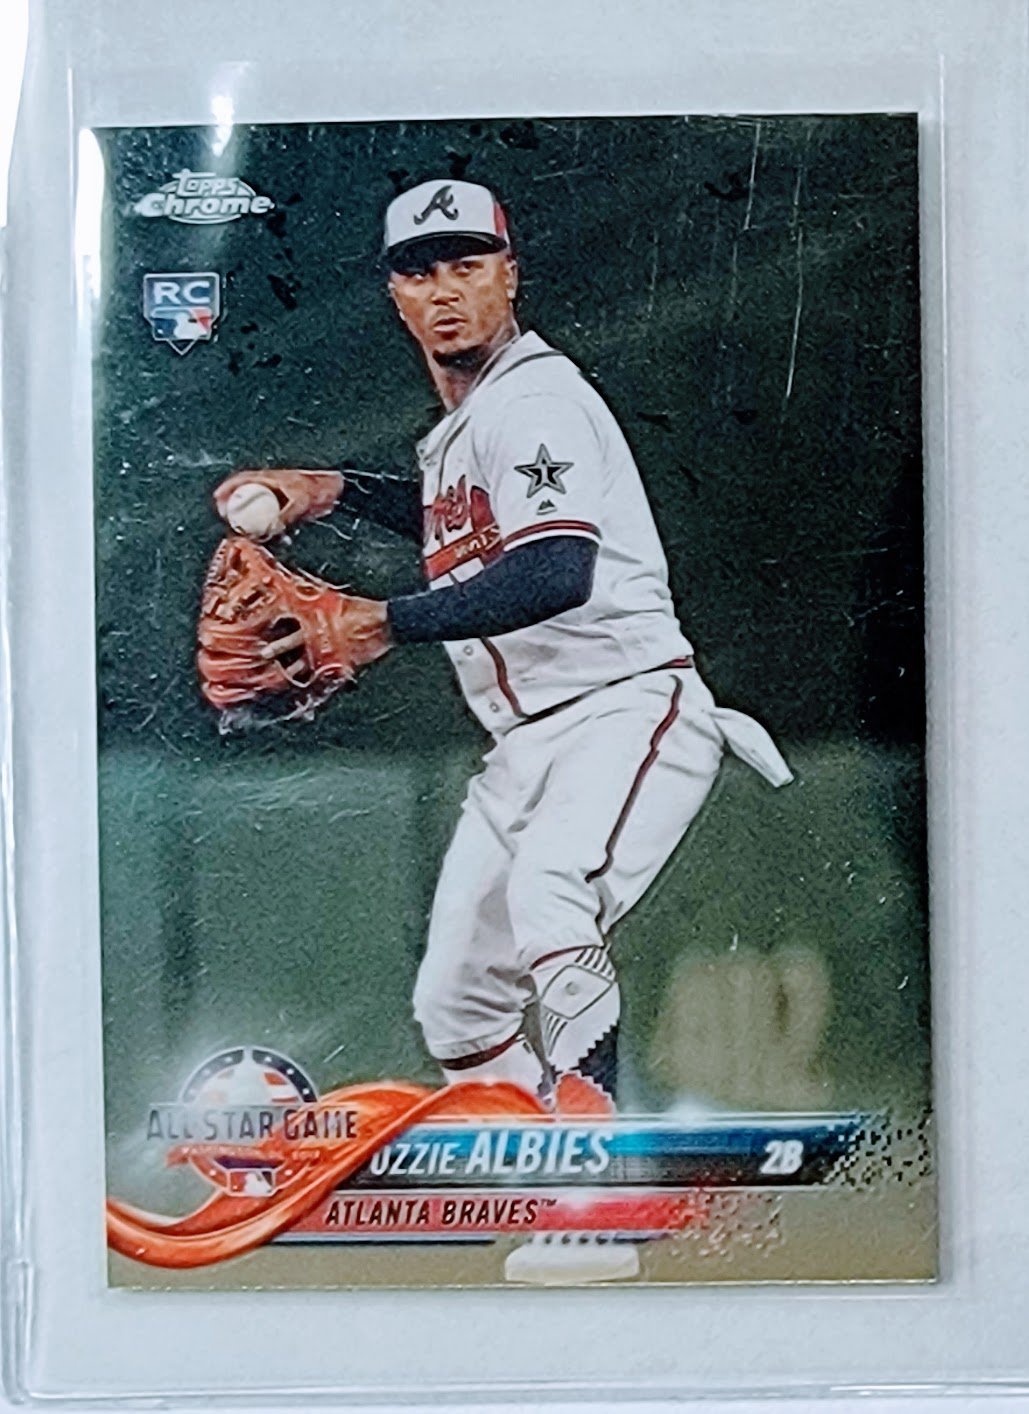 2018 Topps Chrome Update Ozzie Albies All Star Game Rookie Baseball Trading Card TPTV simple Xclusive Collectibles   